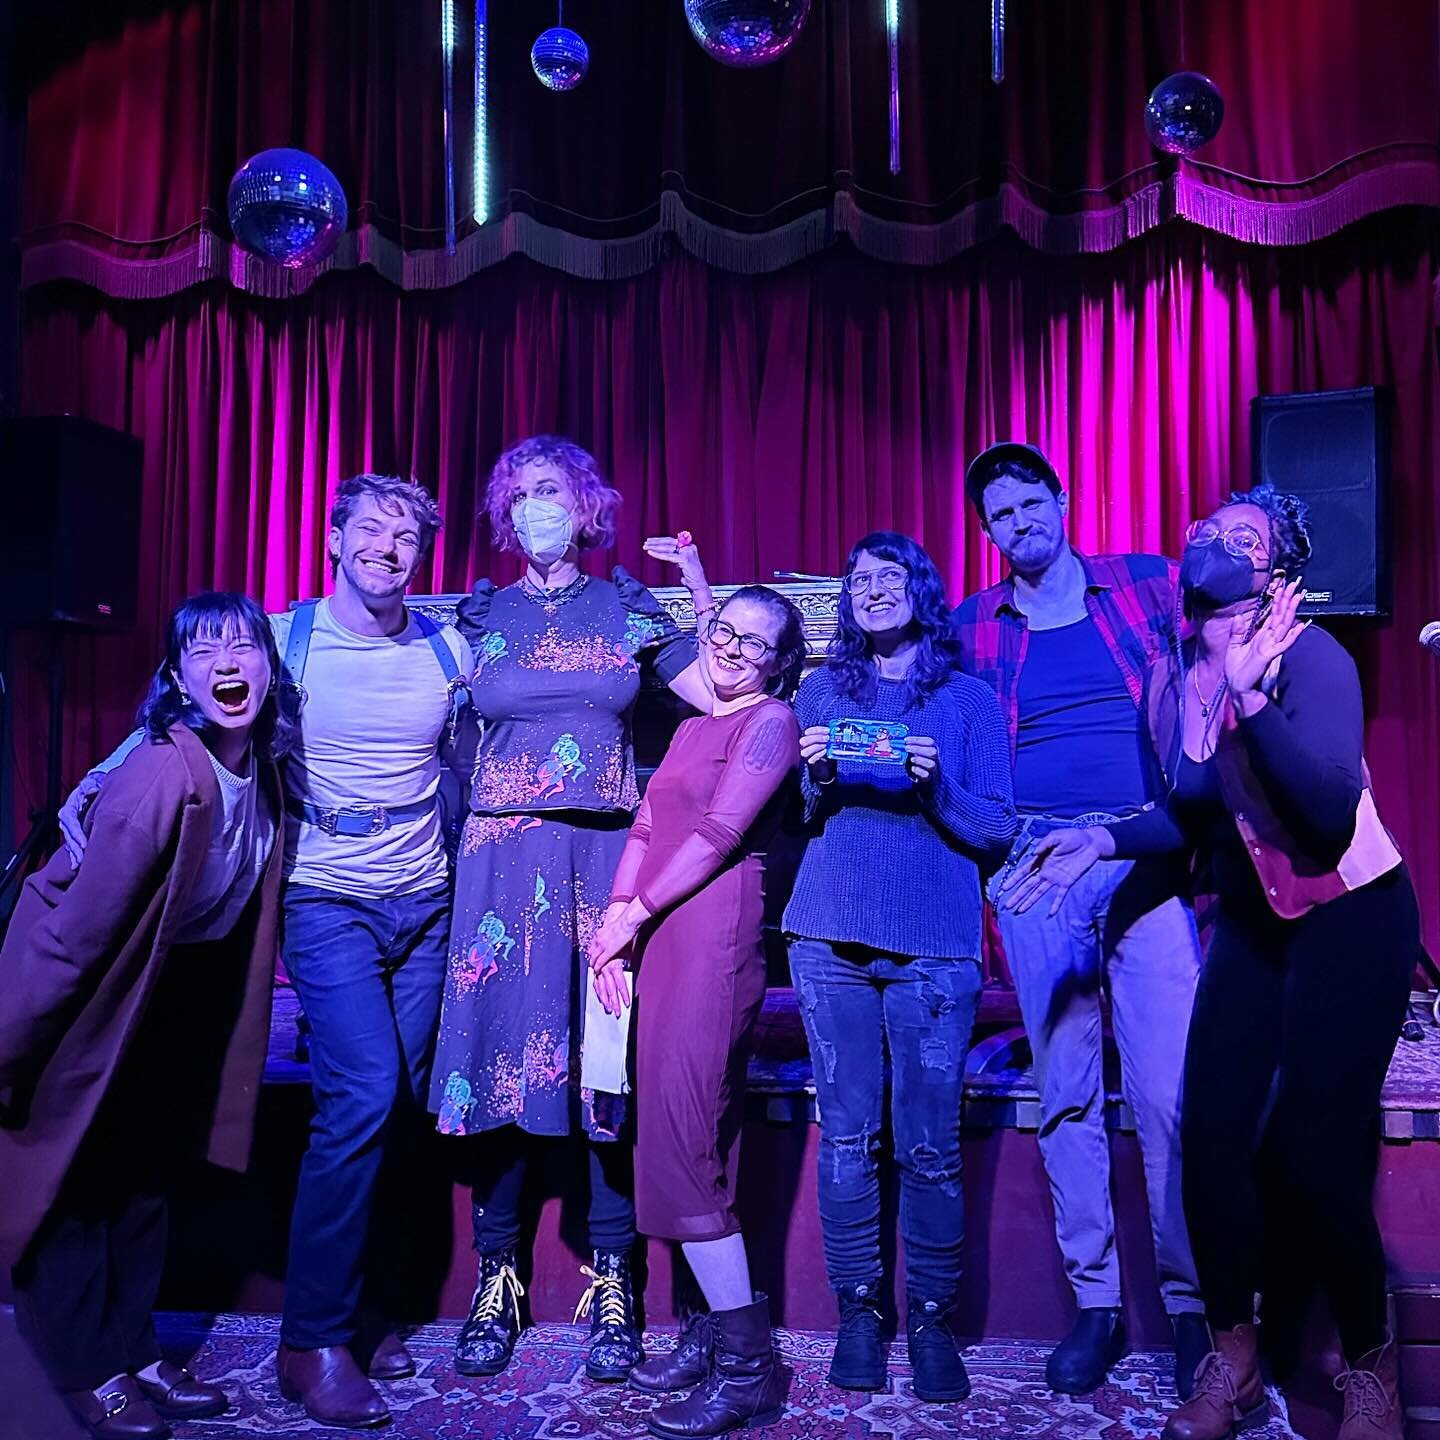 We&rsquo;re still dreaming about February&rsquo;s &ldquo;Future Perfect&rdquo; show. These writers stunned!
Will you be joining us, tomorrow, for our March show; Happy Endings: Lucky Charms, Wishful Thinking